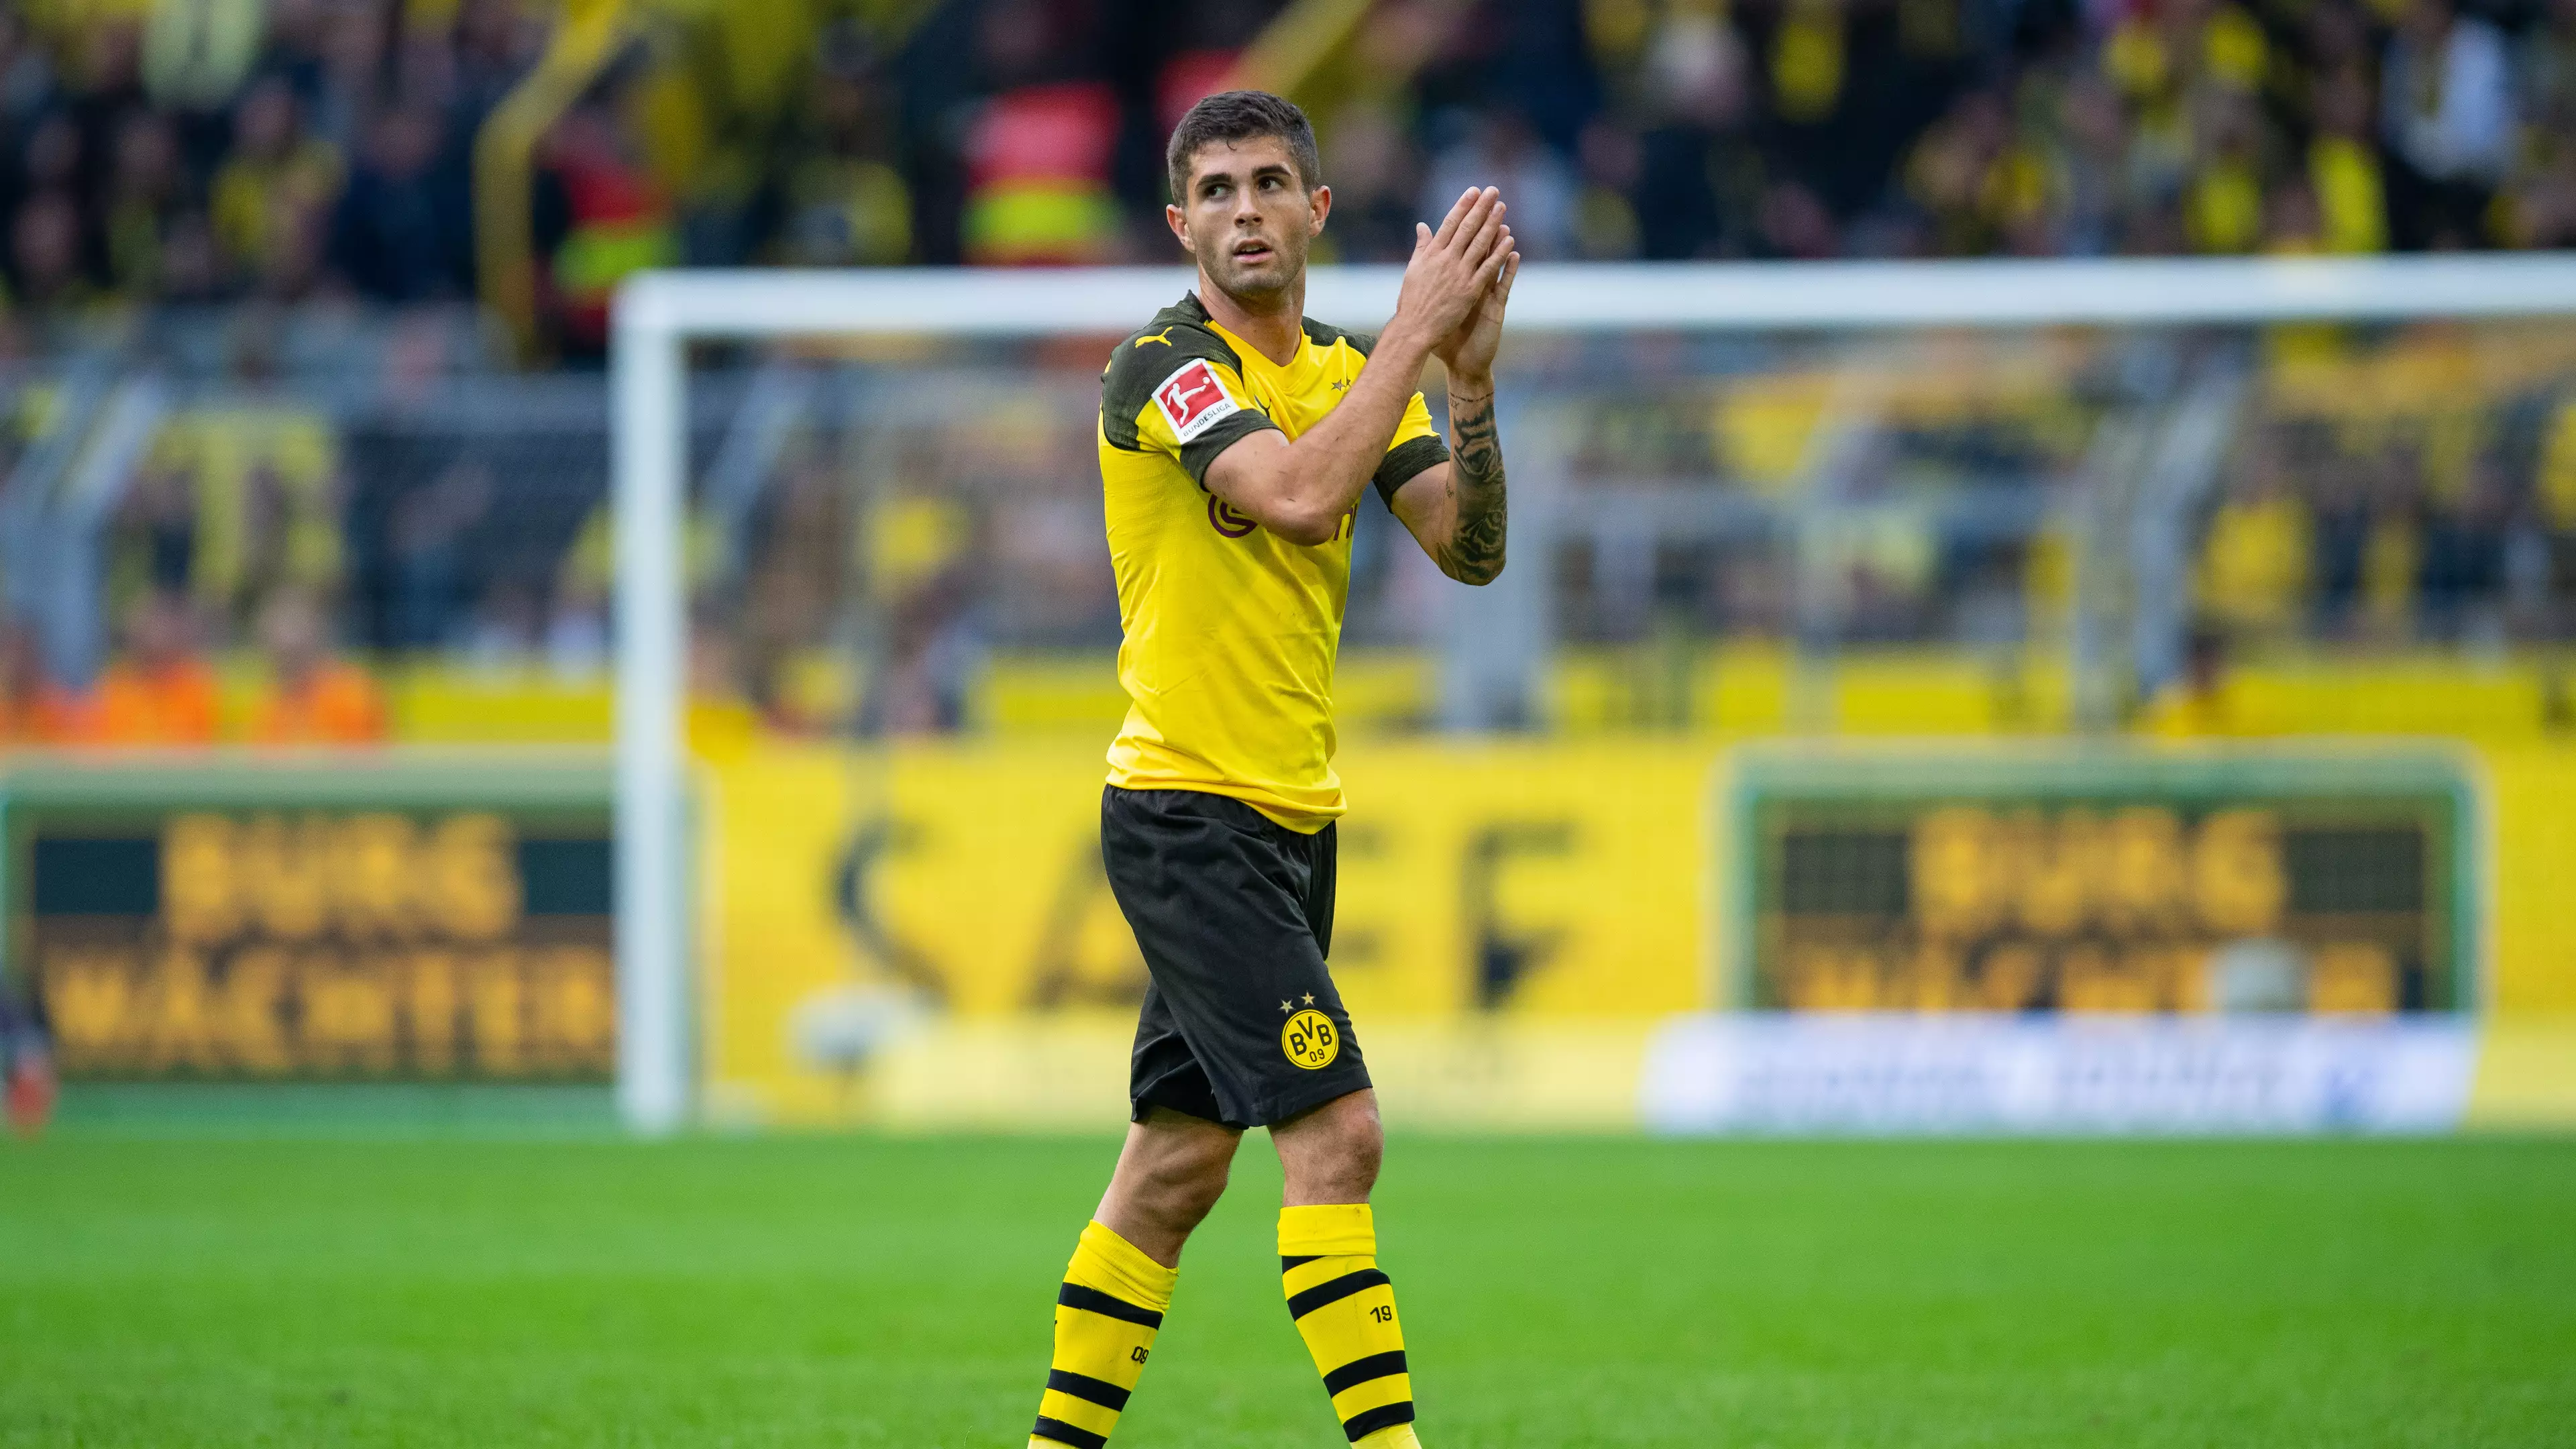 Chelsea Agree £45 Million Deal To Sign Christian Pulisic In The Summer